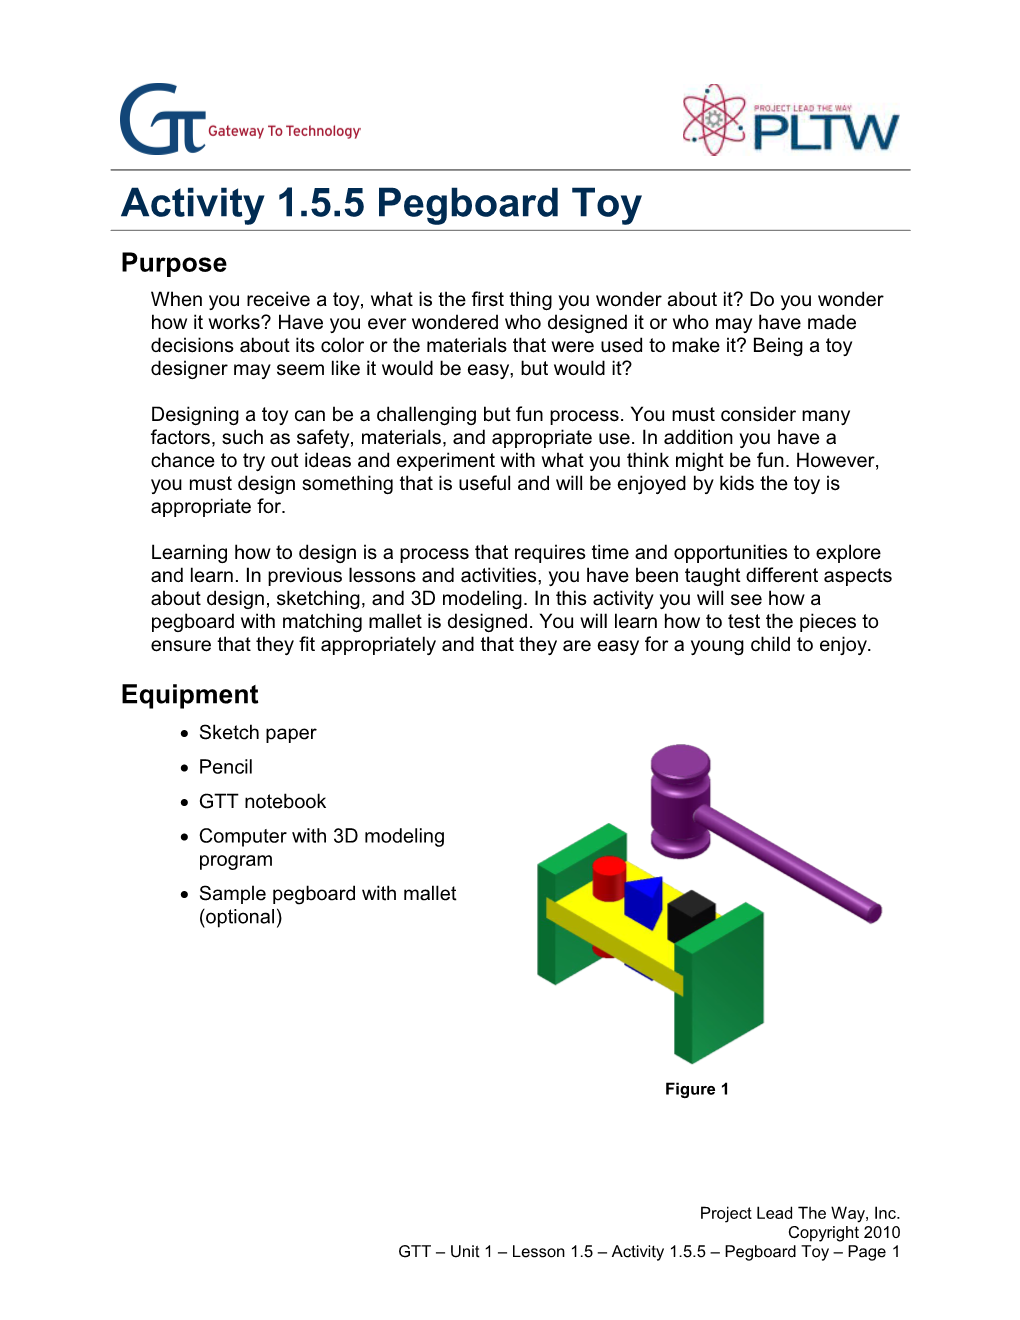 Activity 1.5.5 Pegboard Toy